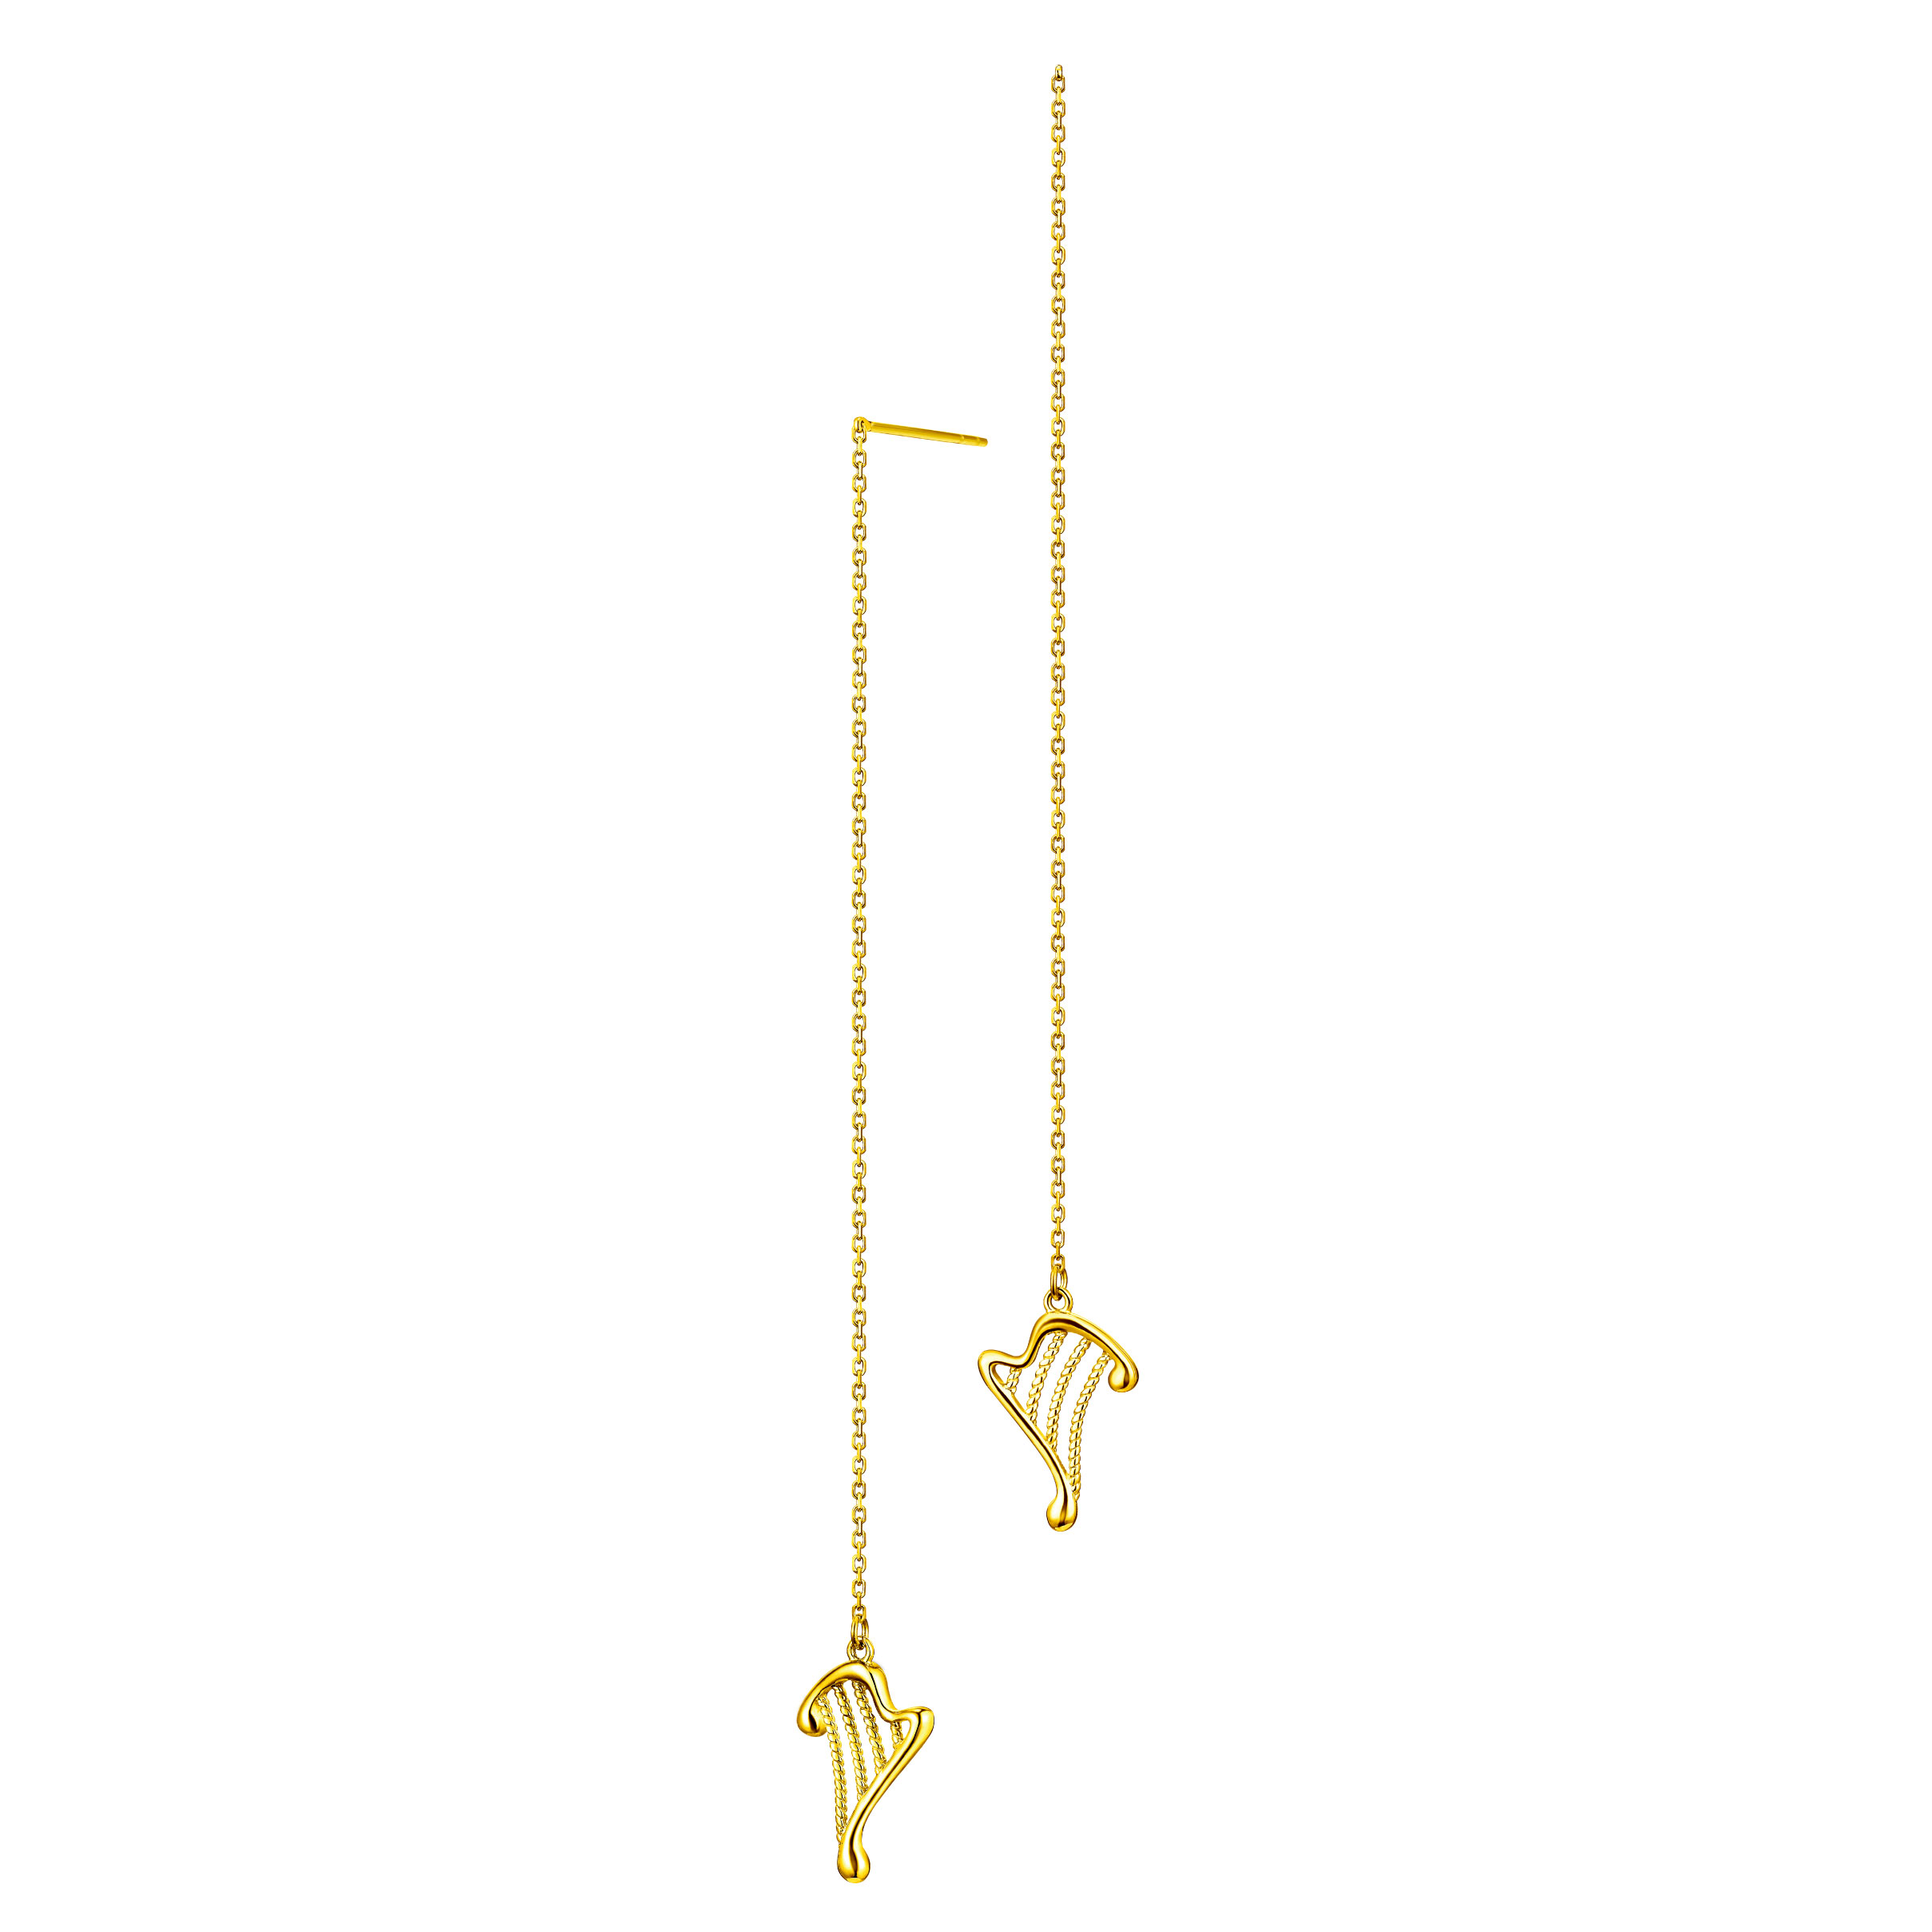 Goldstyle "Enchanted Lyre" Gold Earrings